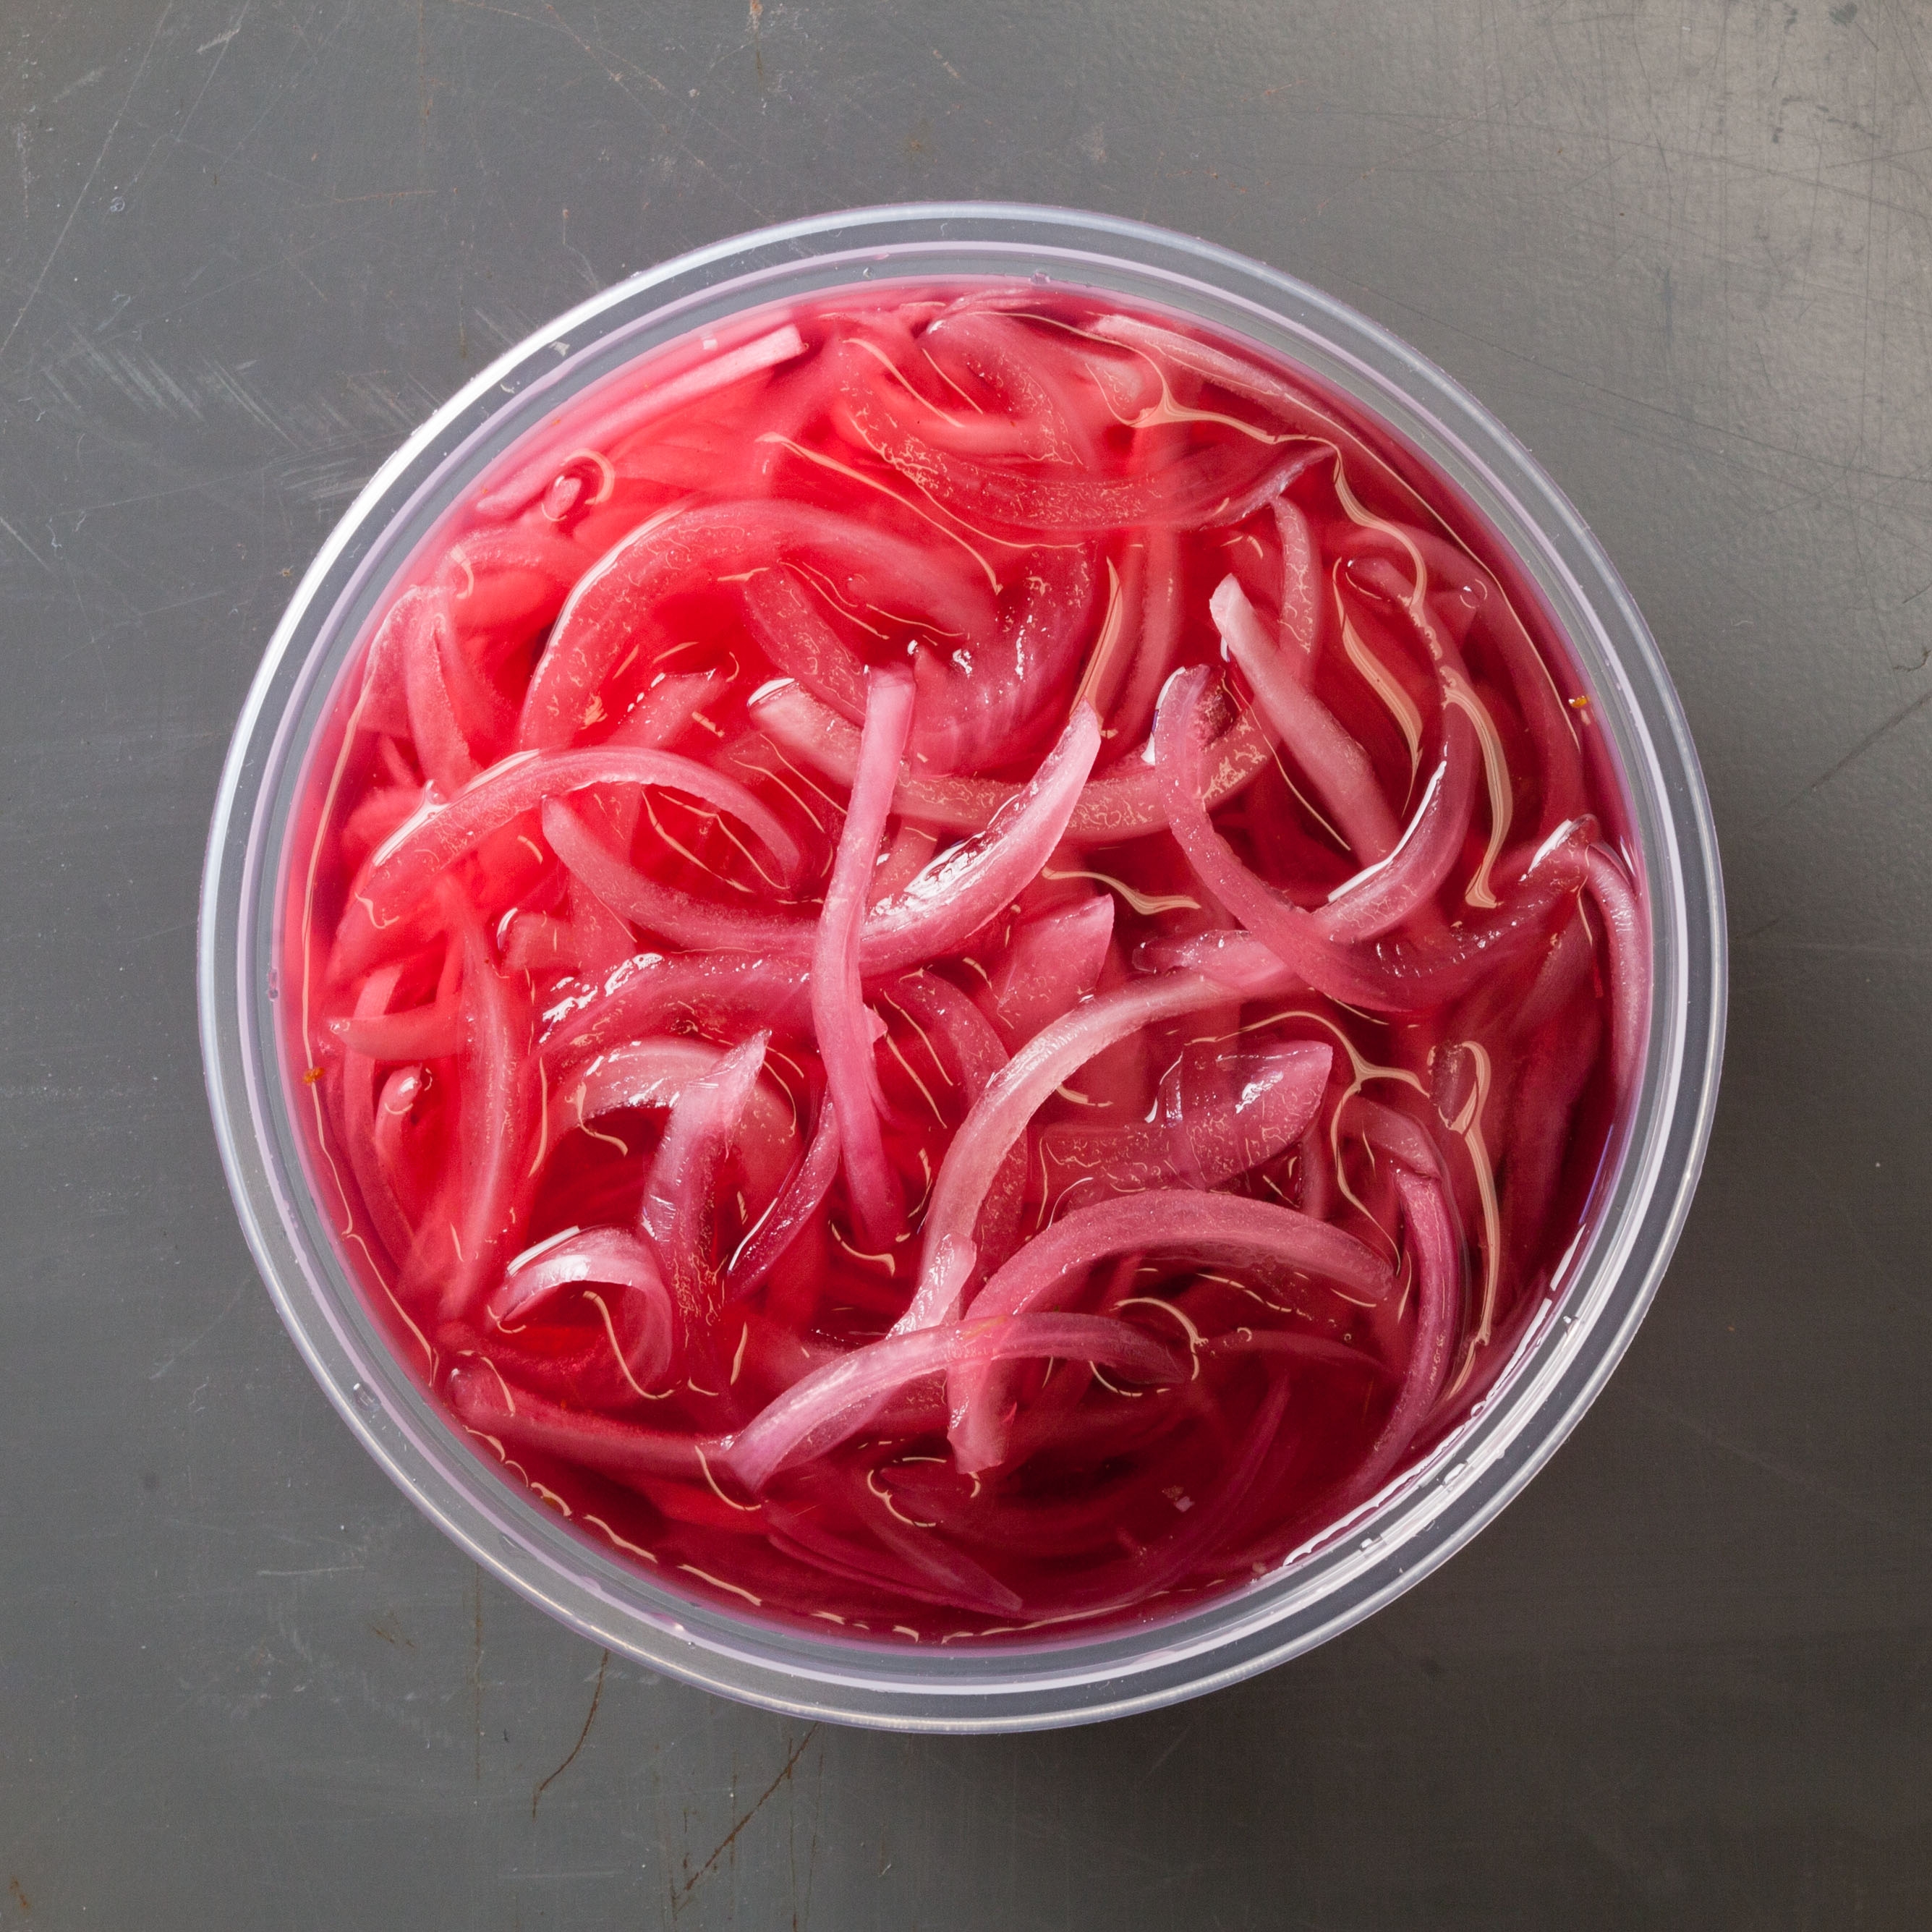 https://res.cloudinary.com/hksqkdlah/image/upload/32046_sfs-pickled-red-onions-0279.jpg